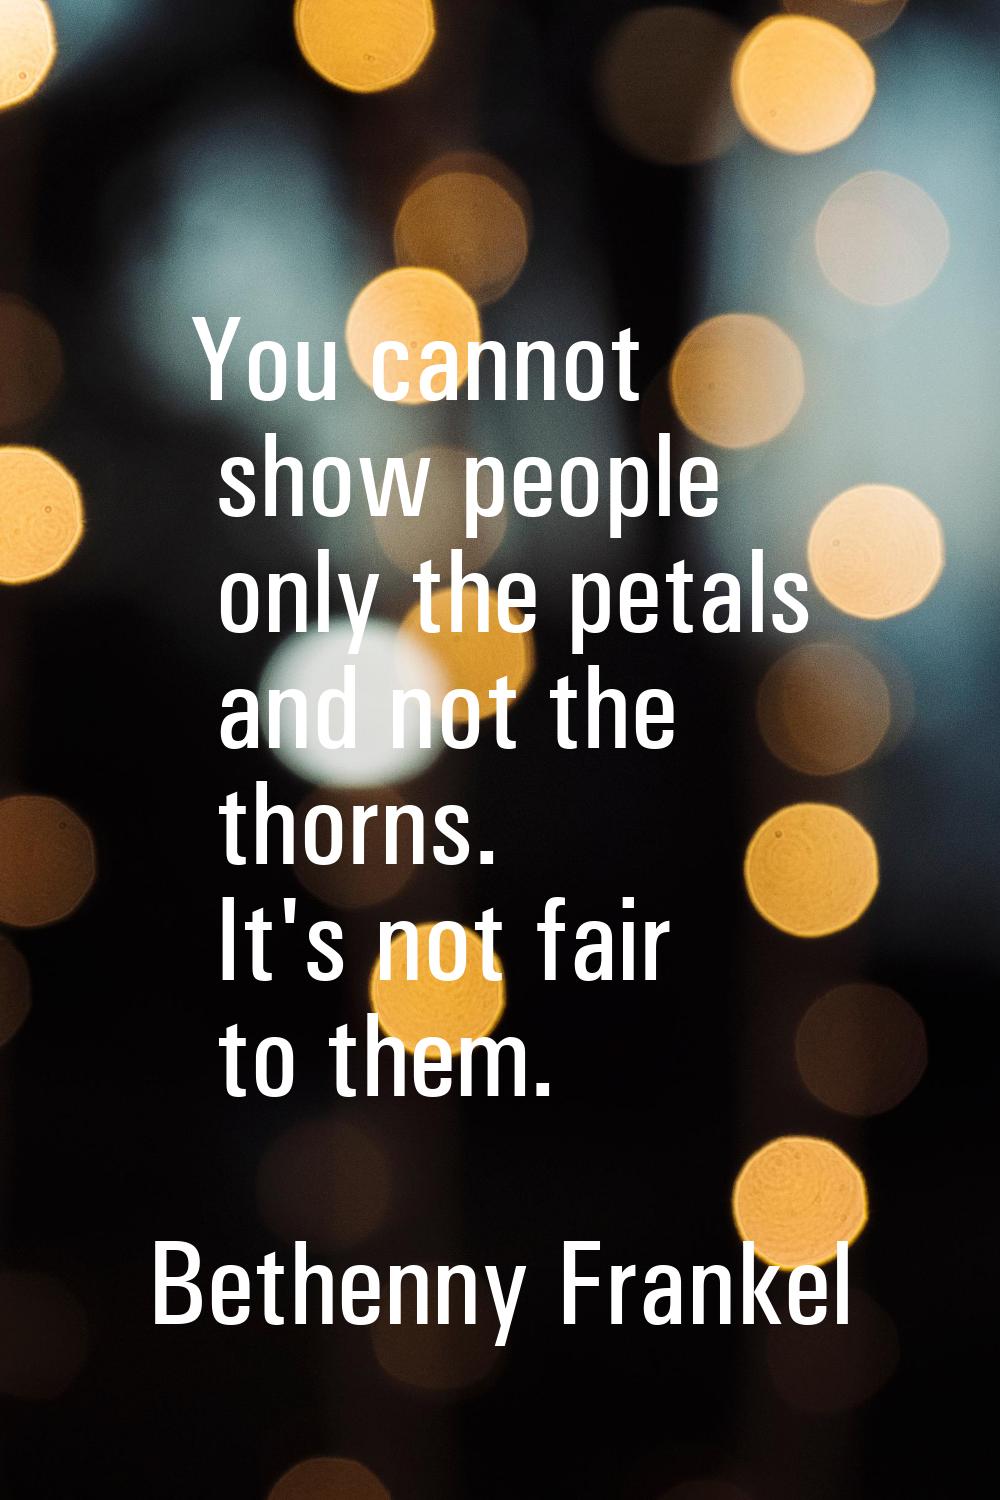 You cannot show people only the petals and not the thorns. It's not fair to them.